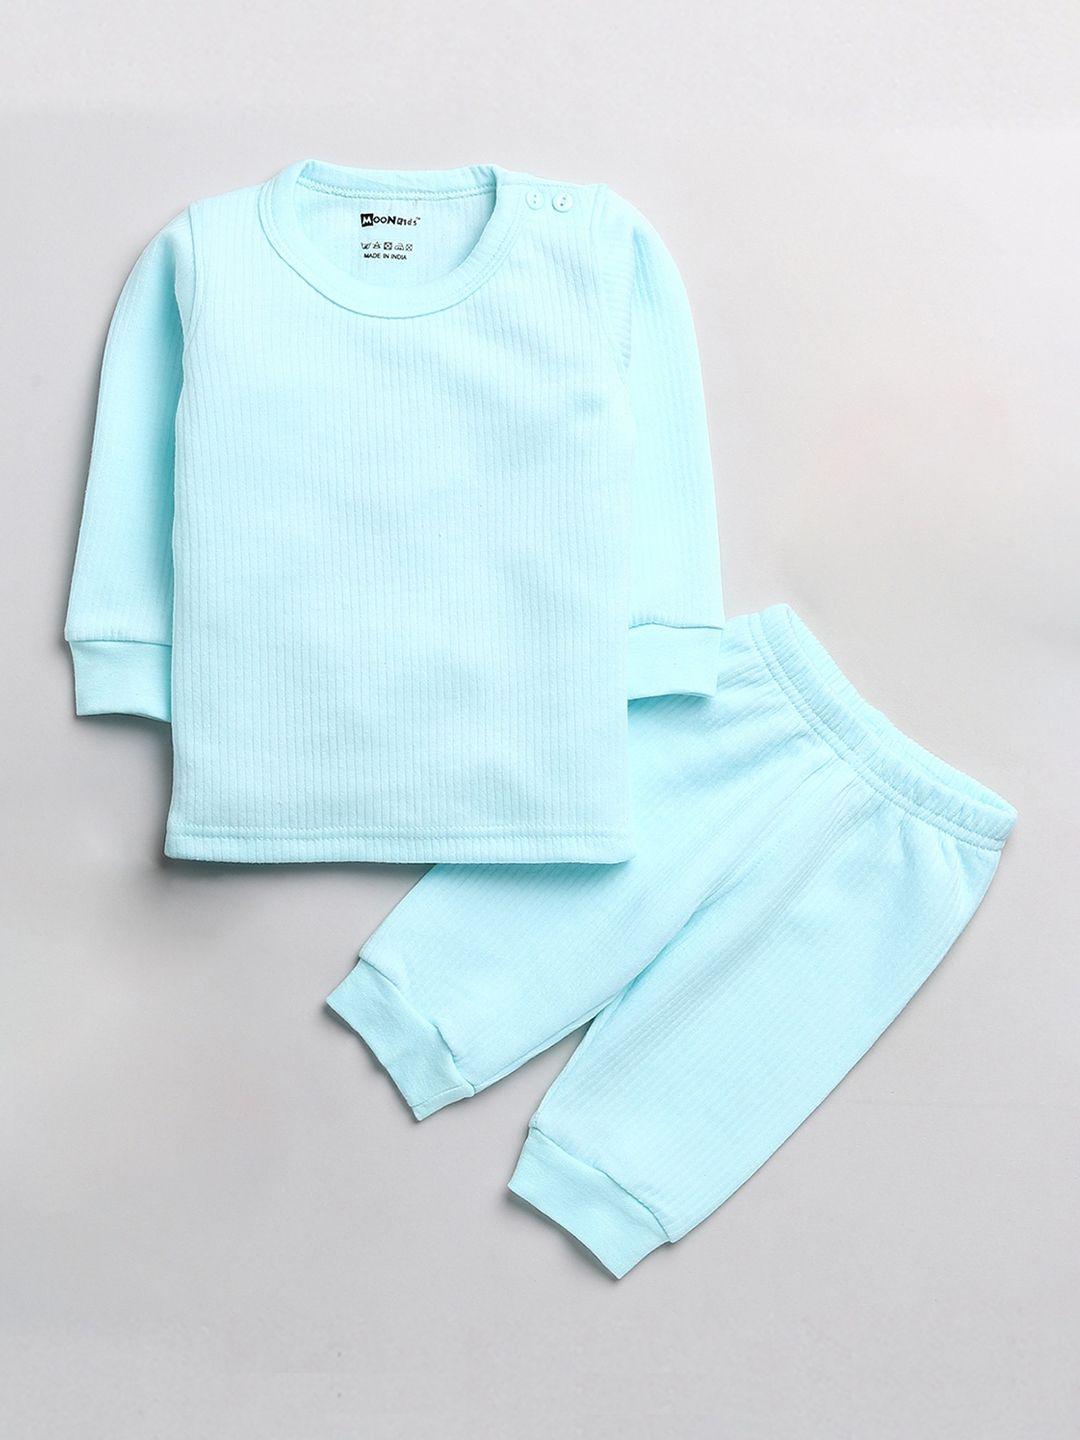 moonkids boys blue solid cotton thermal set